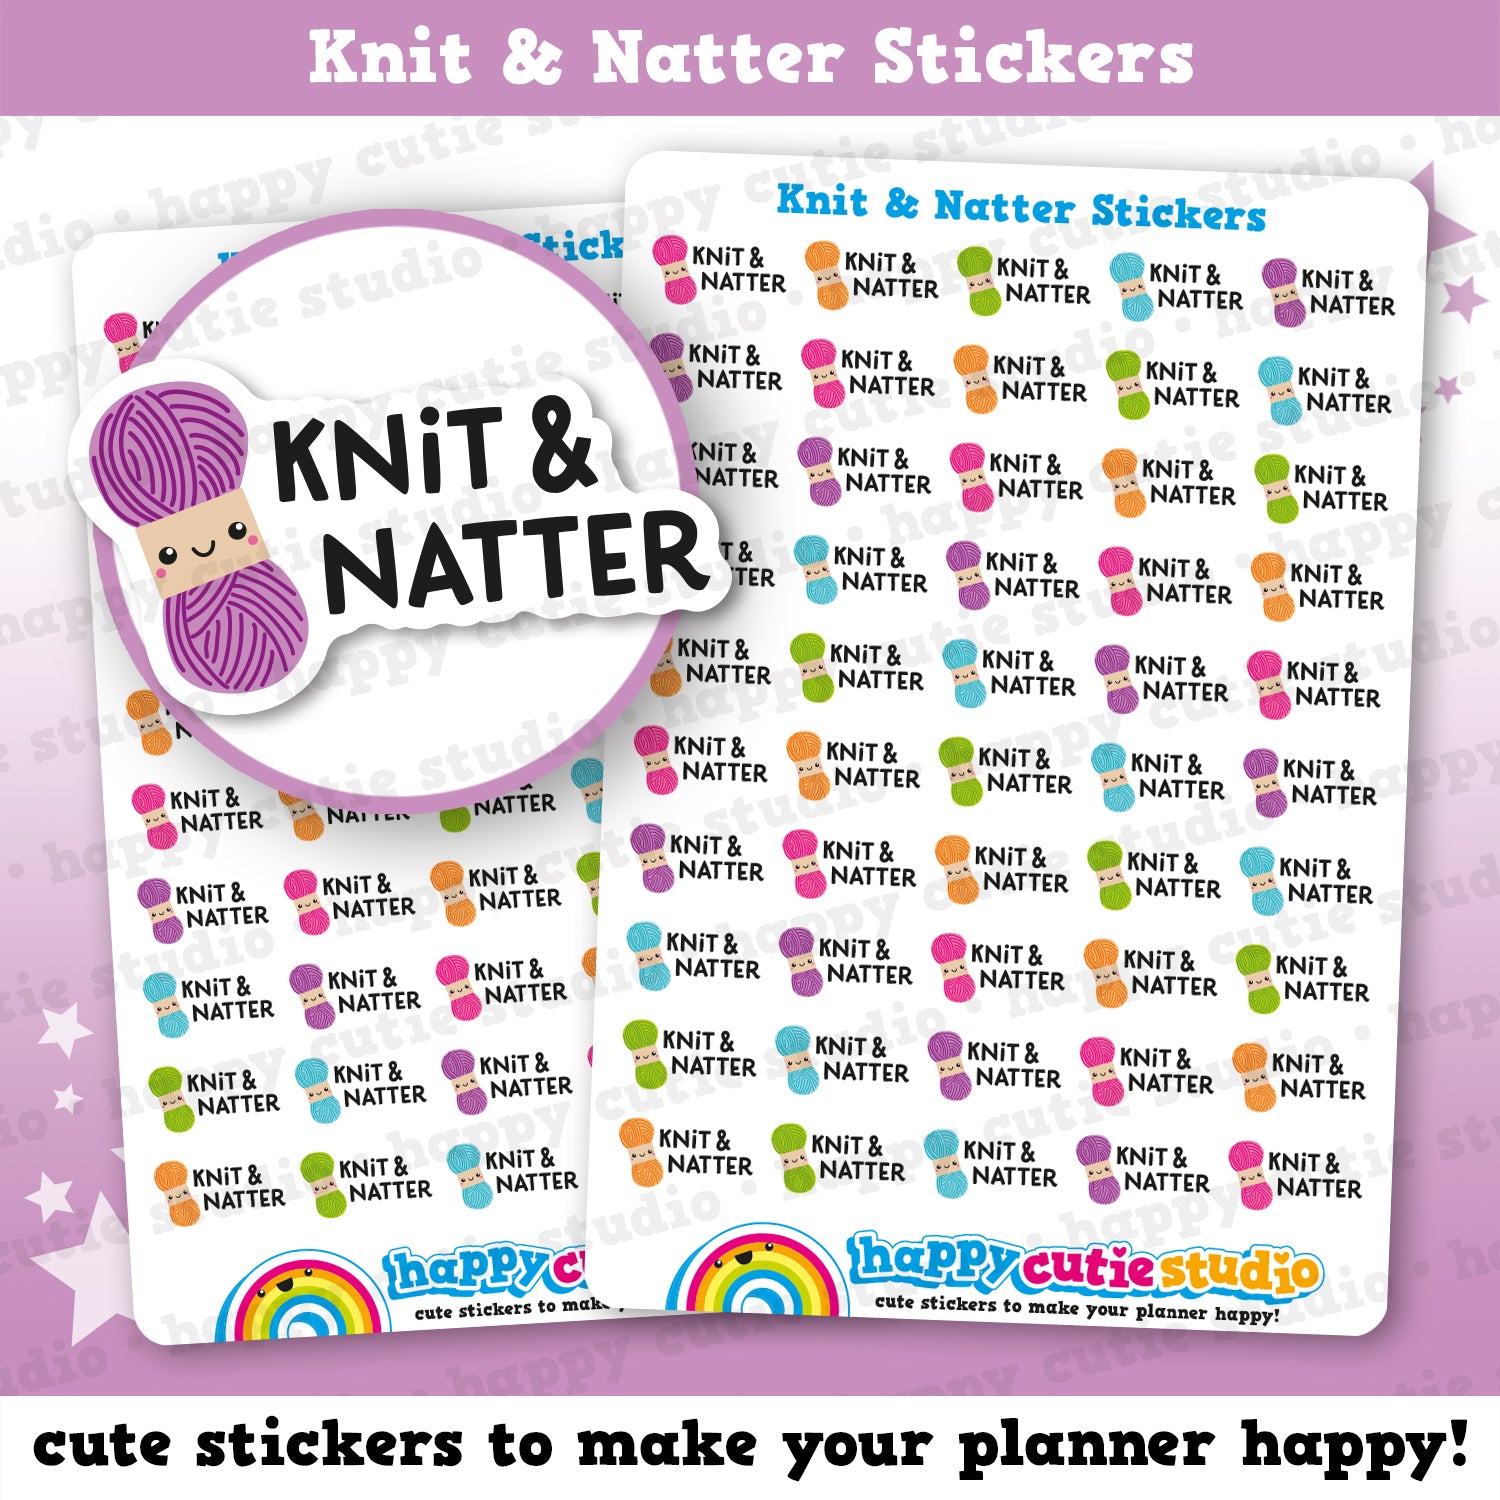 50 Cute Knit and Natter Stickers